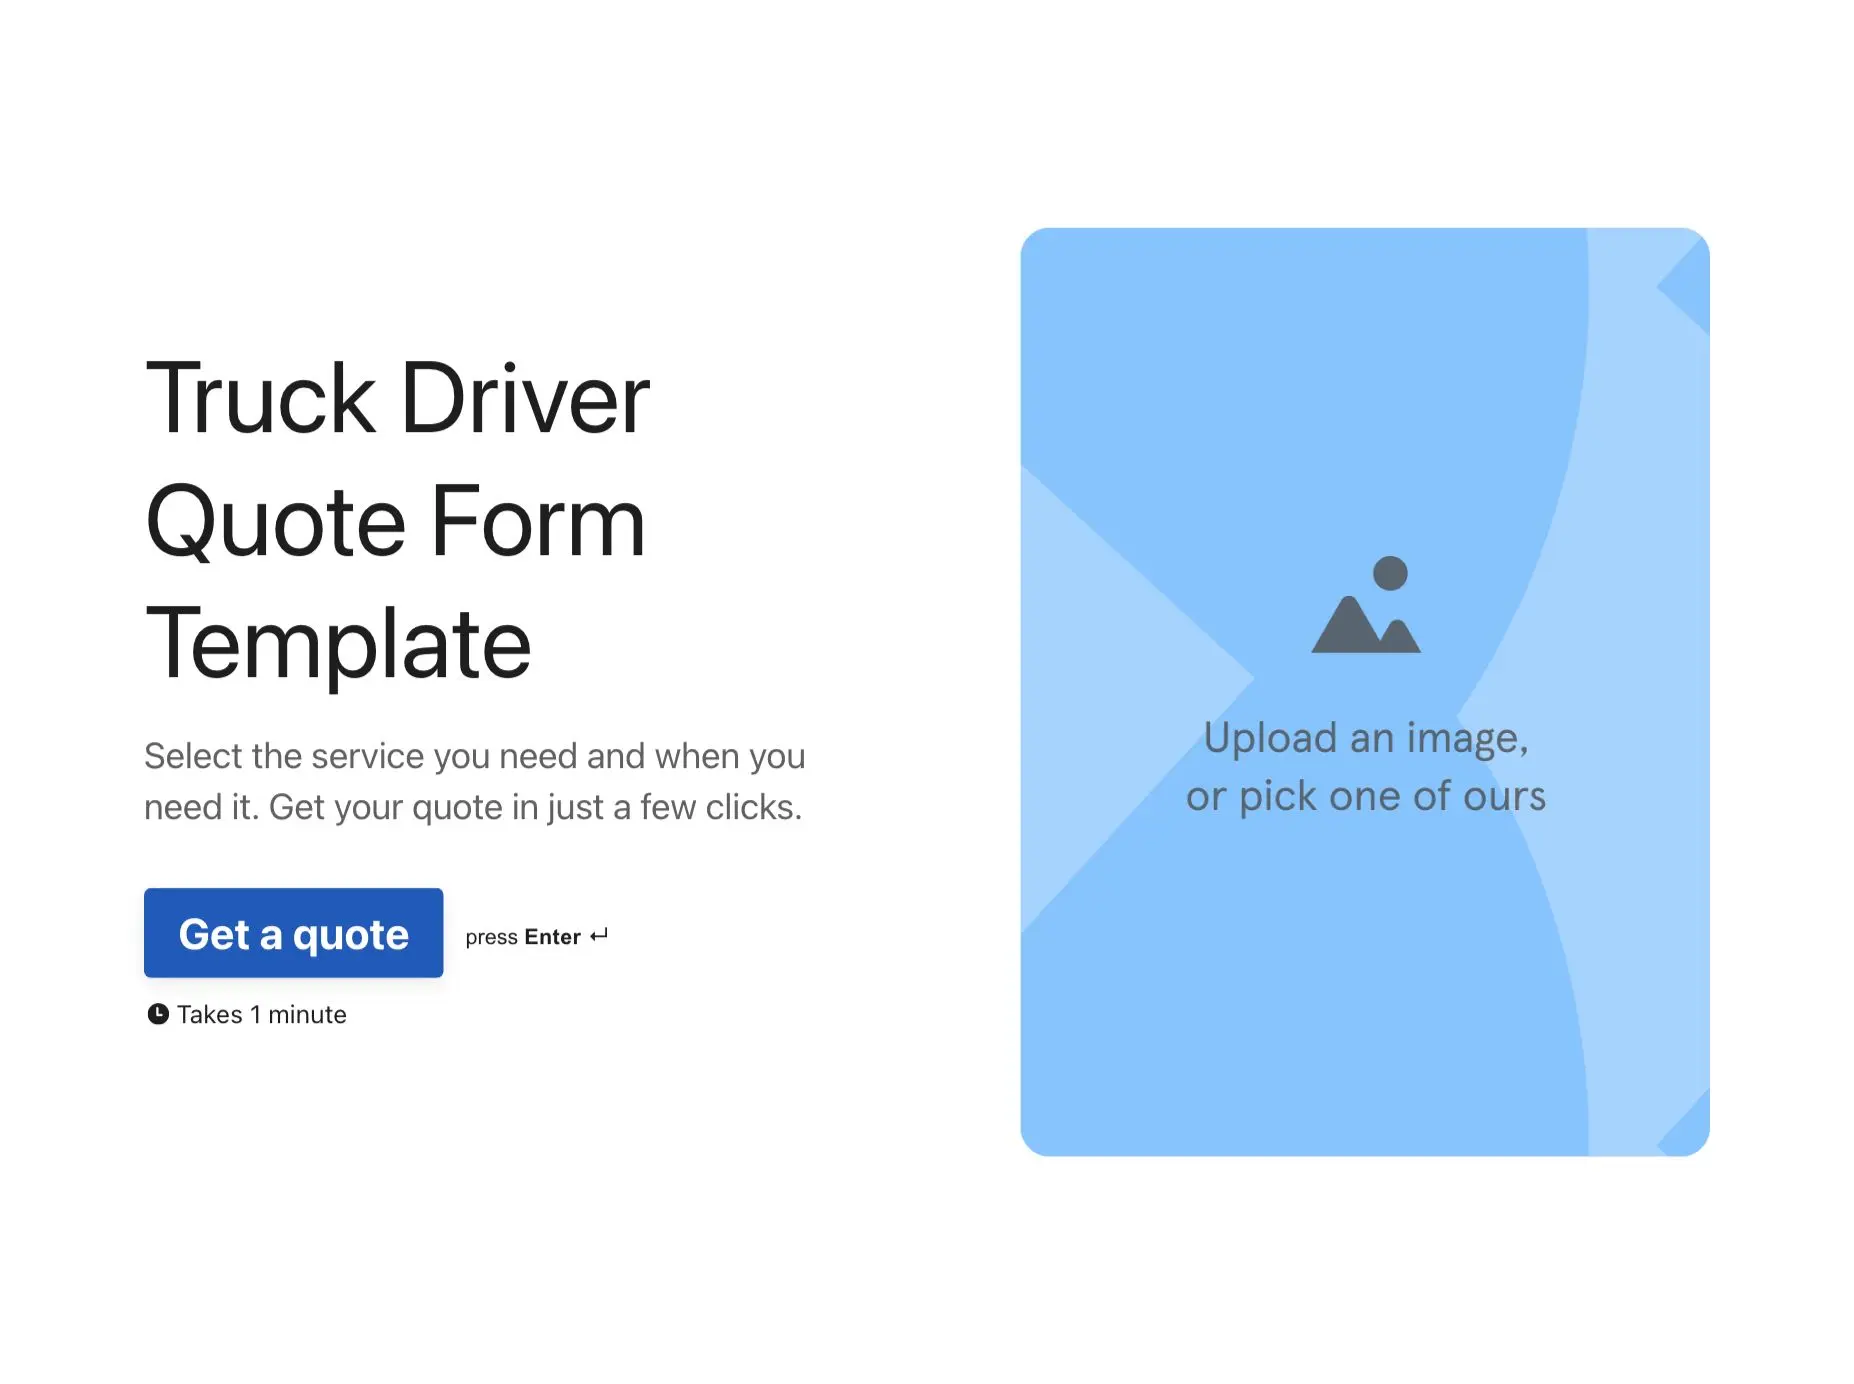 Truck Driver Quote Form Template Hero